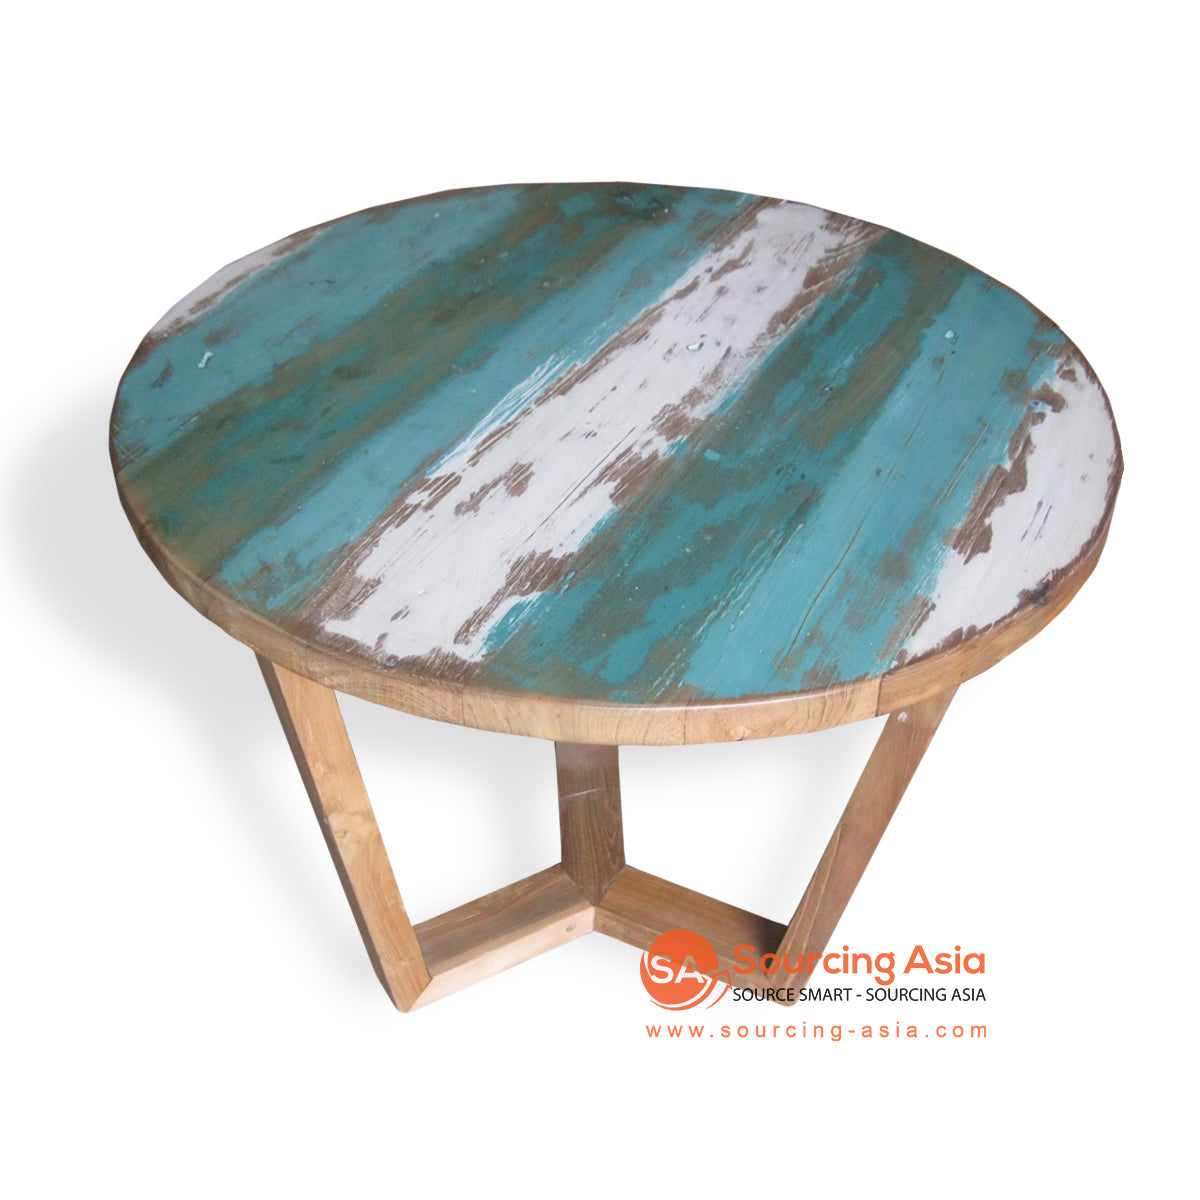 WK026-60 NATURAL RECYCLED BOAT WOOD ROUND COFFEE TABLE